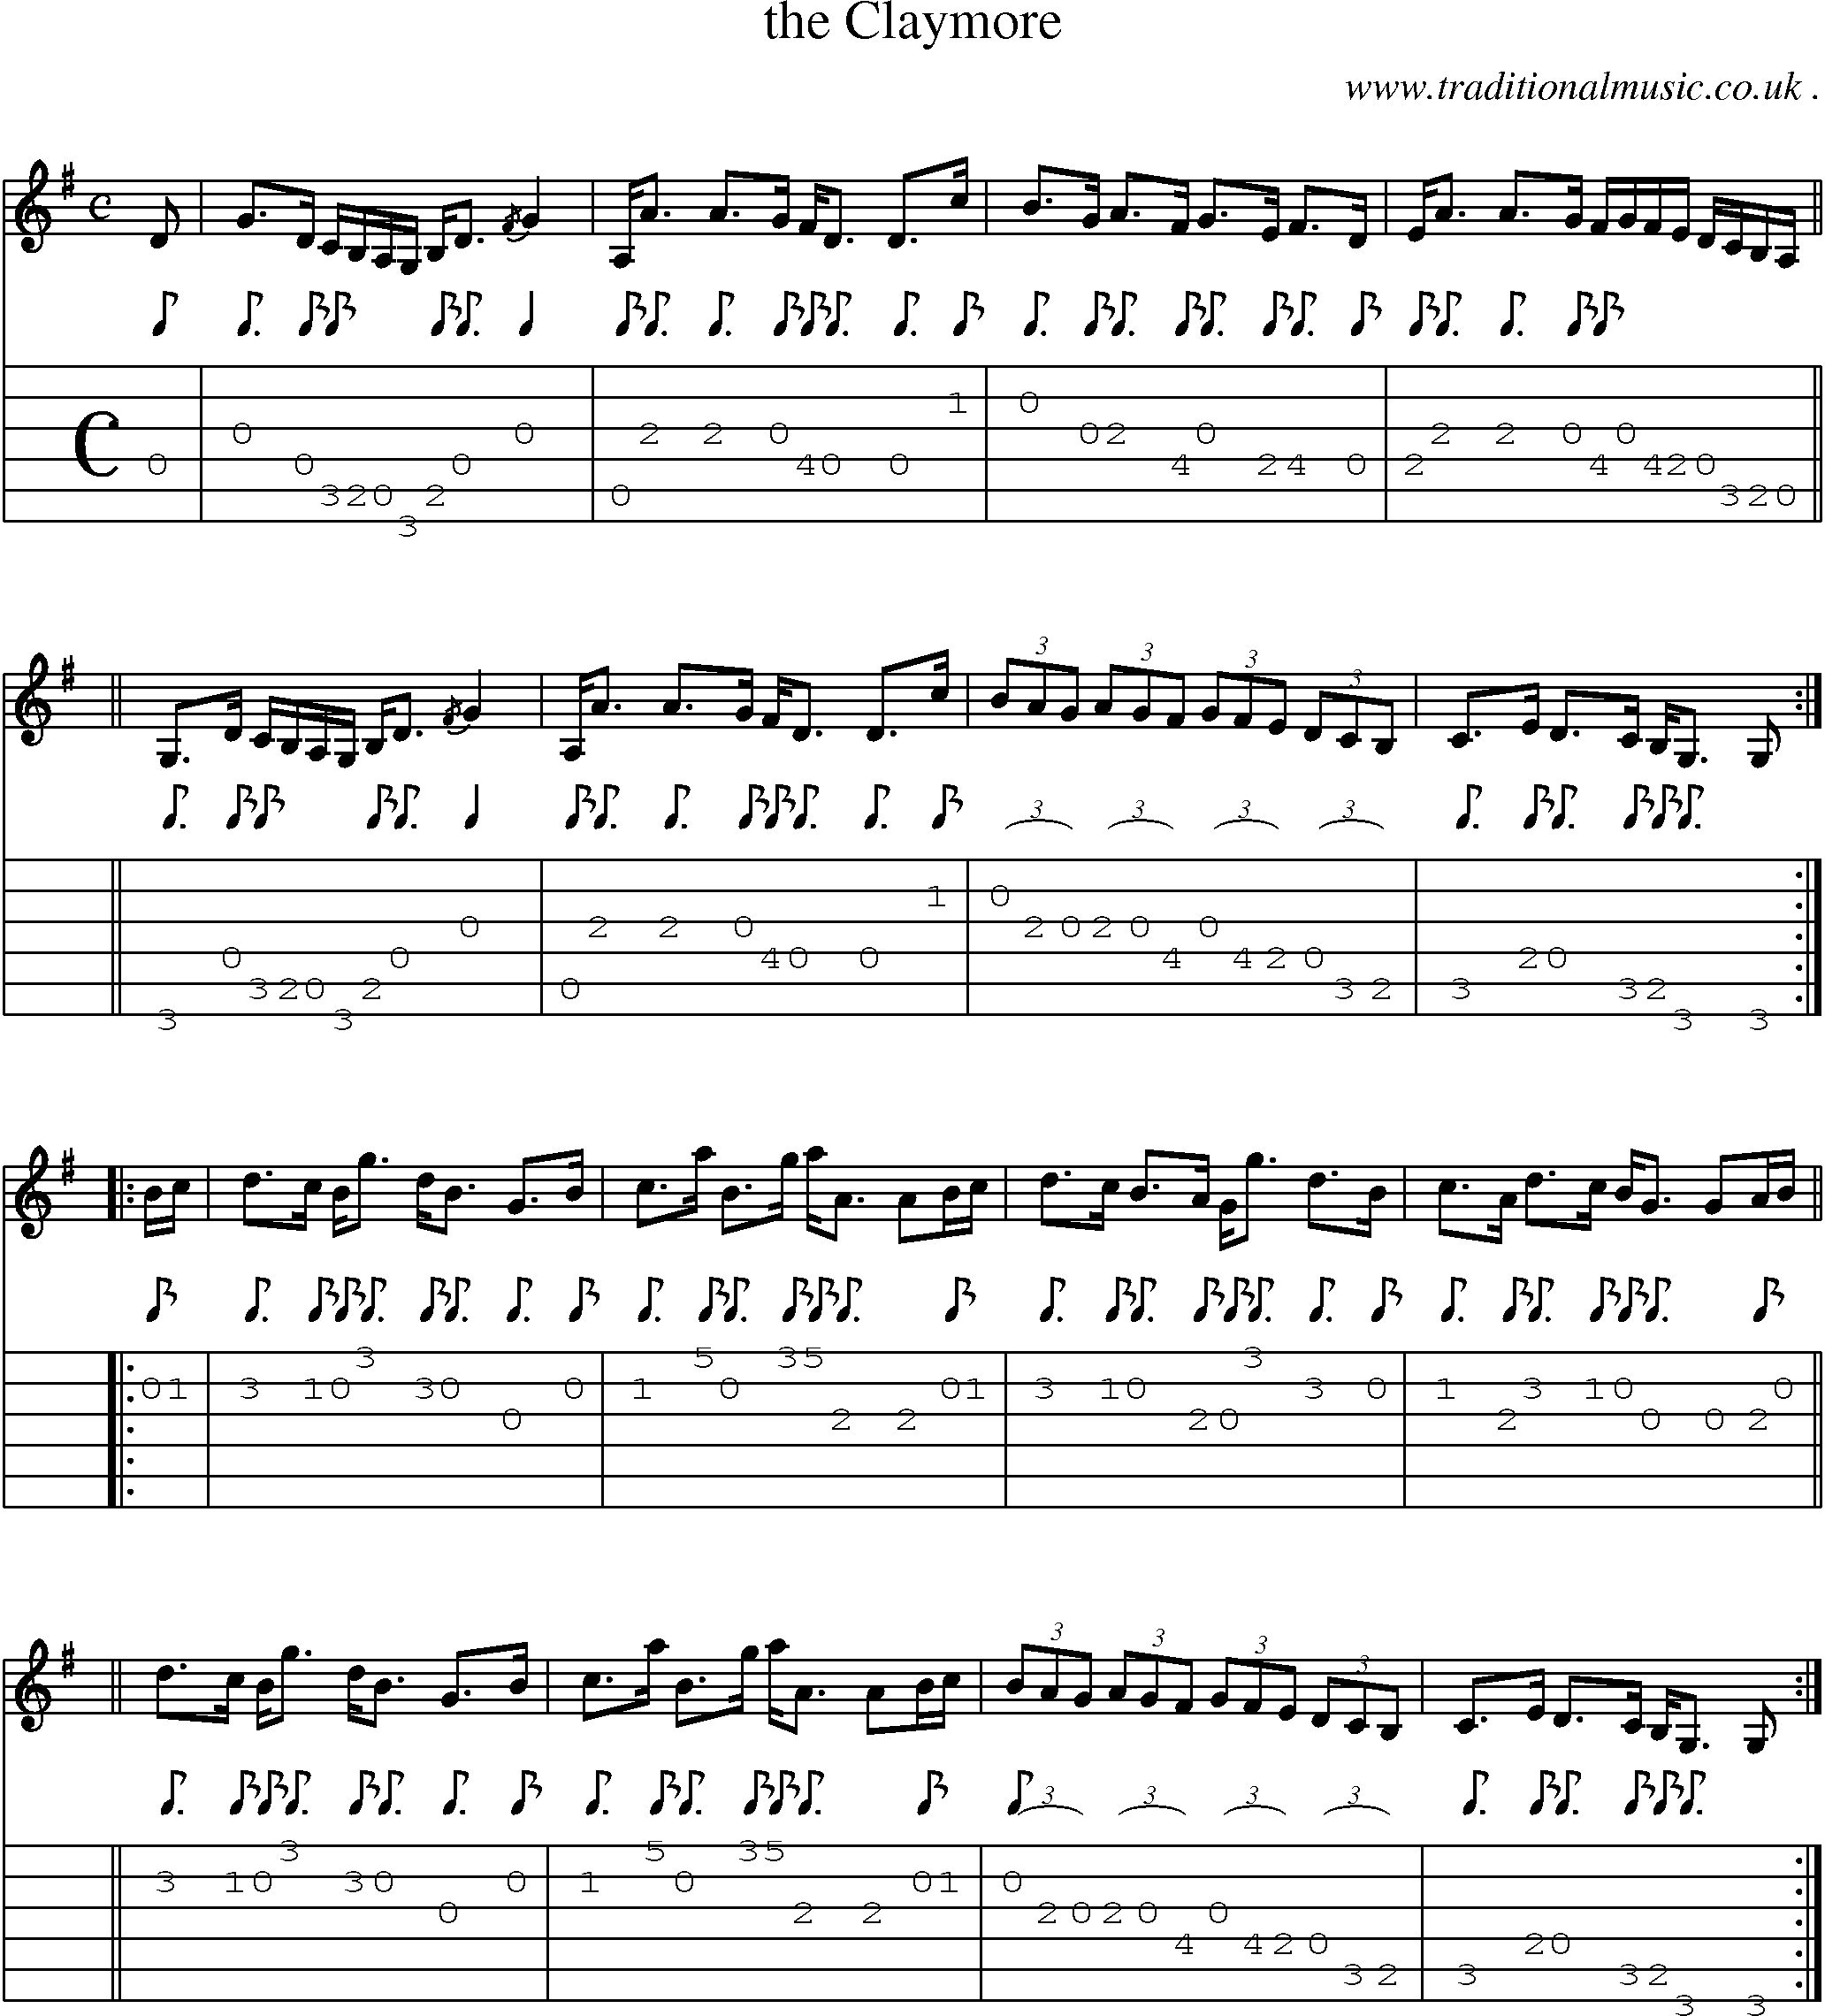 Sheet-music  score, Chords and Guitar Tabs for The Claymore